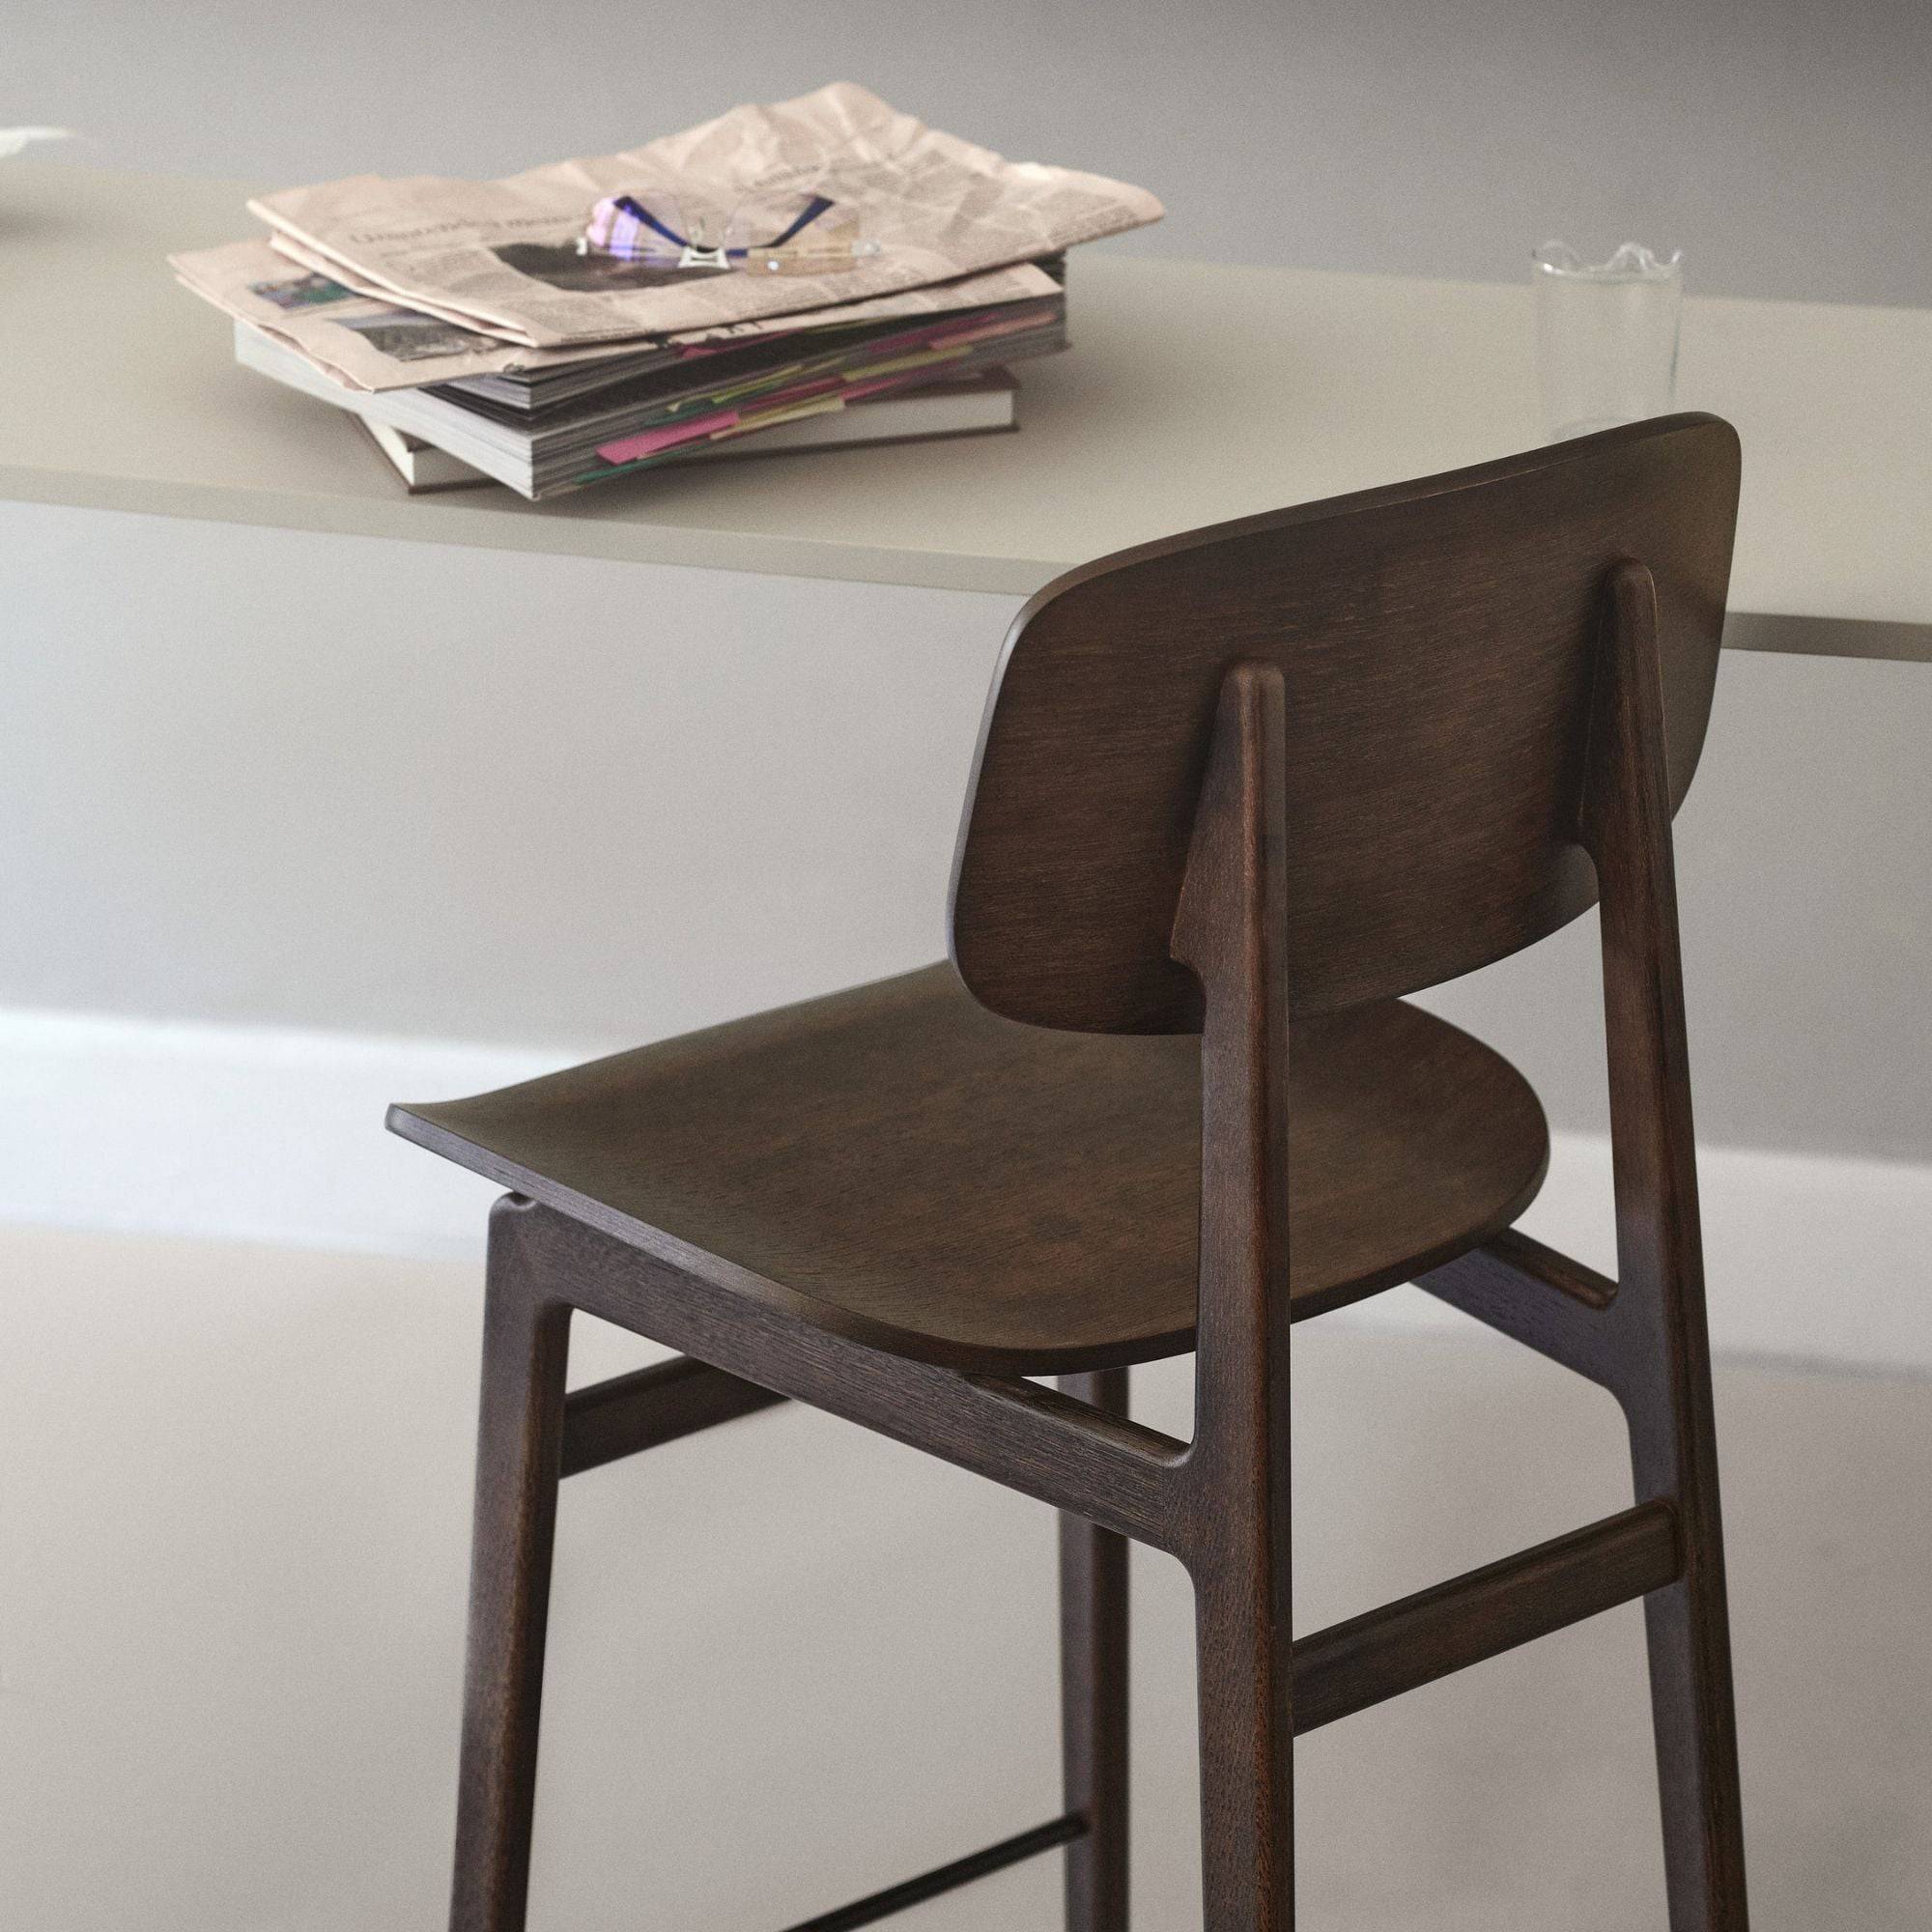 NY11 Bar Chair - THAT COOL LIVING